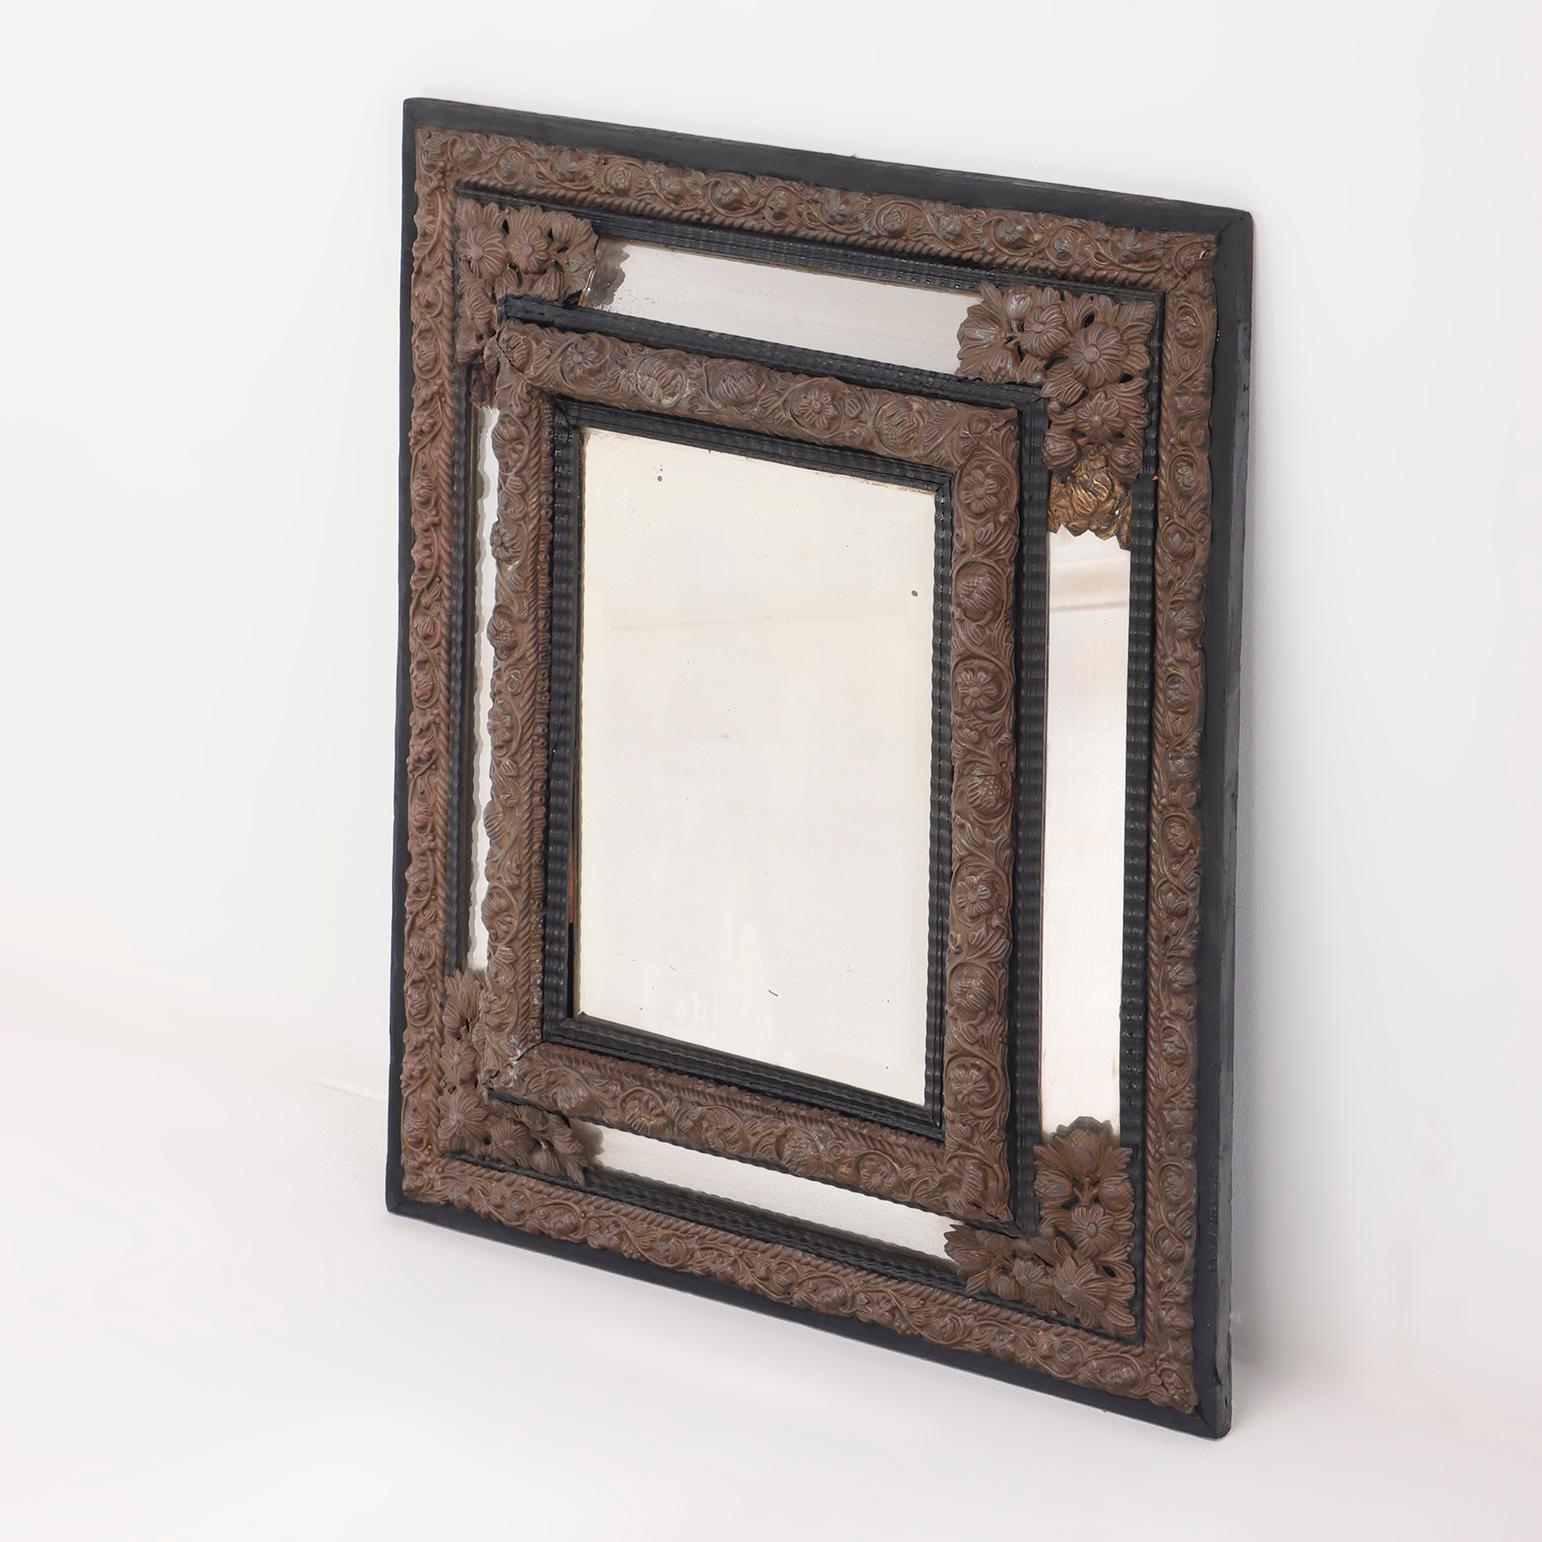 Small nineteenth century Continental brass and wood repousse mirror having ripple form mouldings.